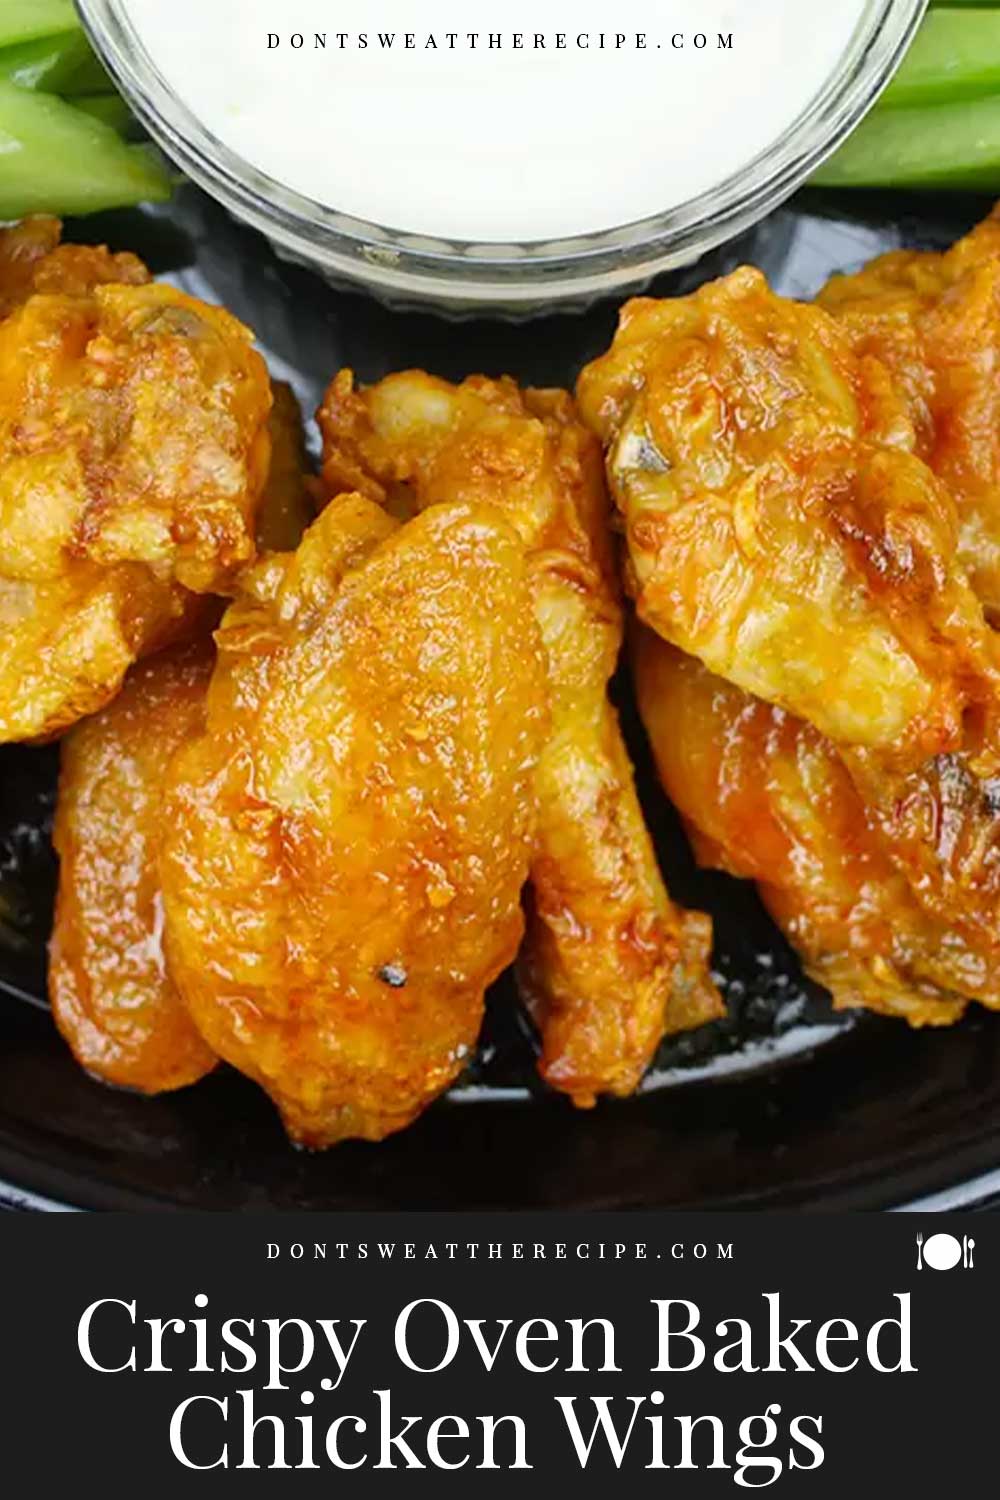 How Long To Cook Chicken Wings In Gas Oven - Hill Woot1990